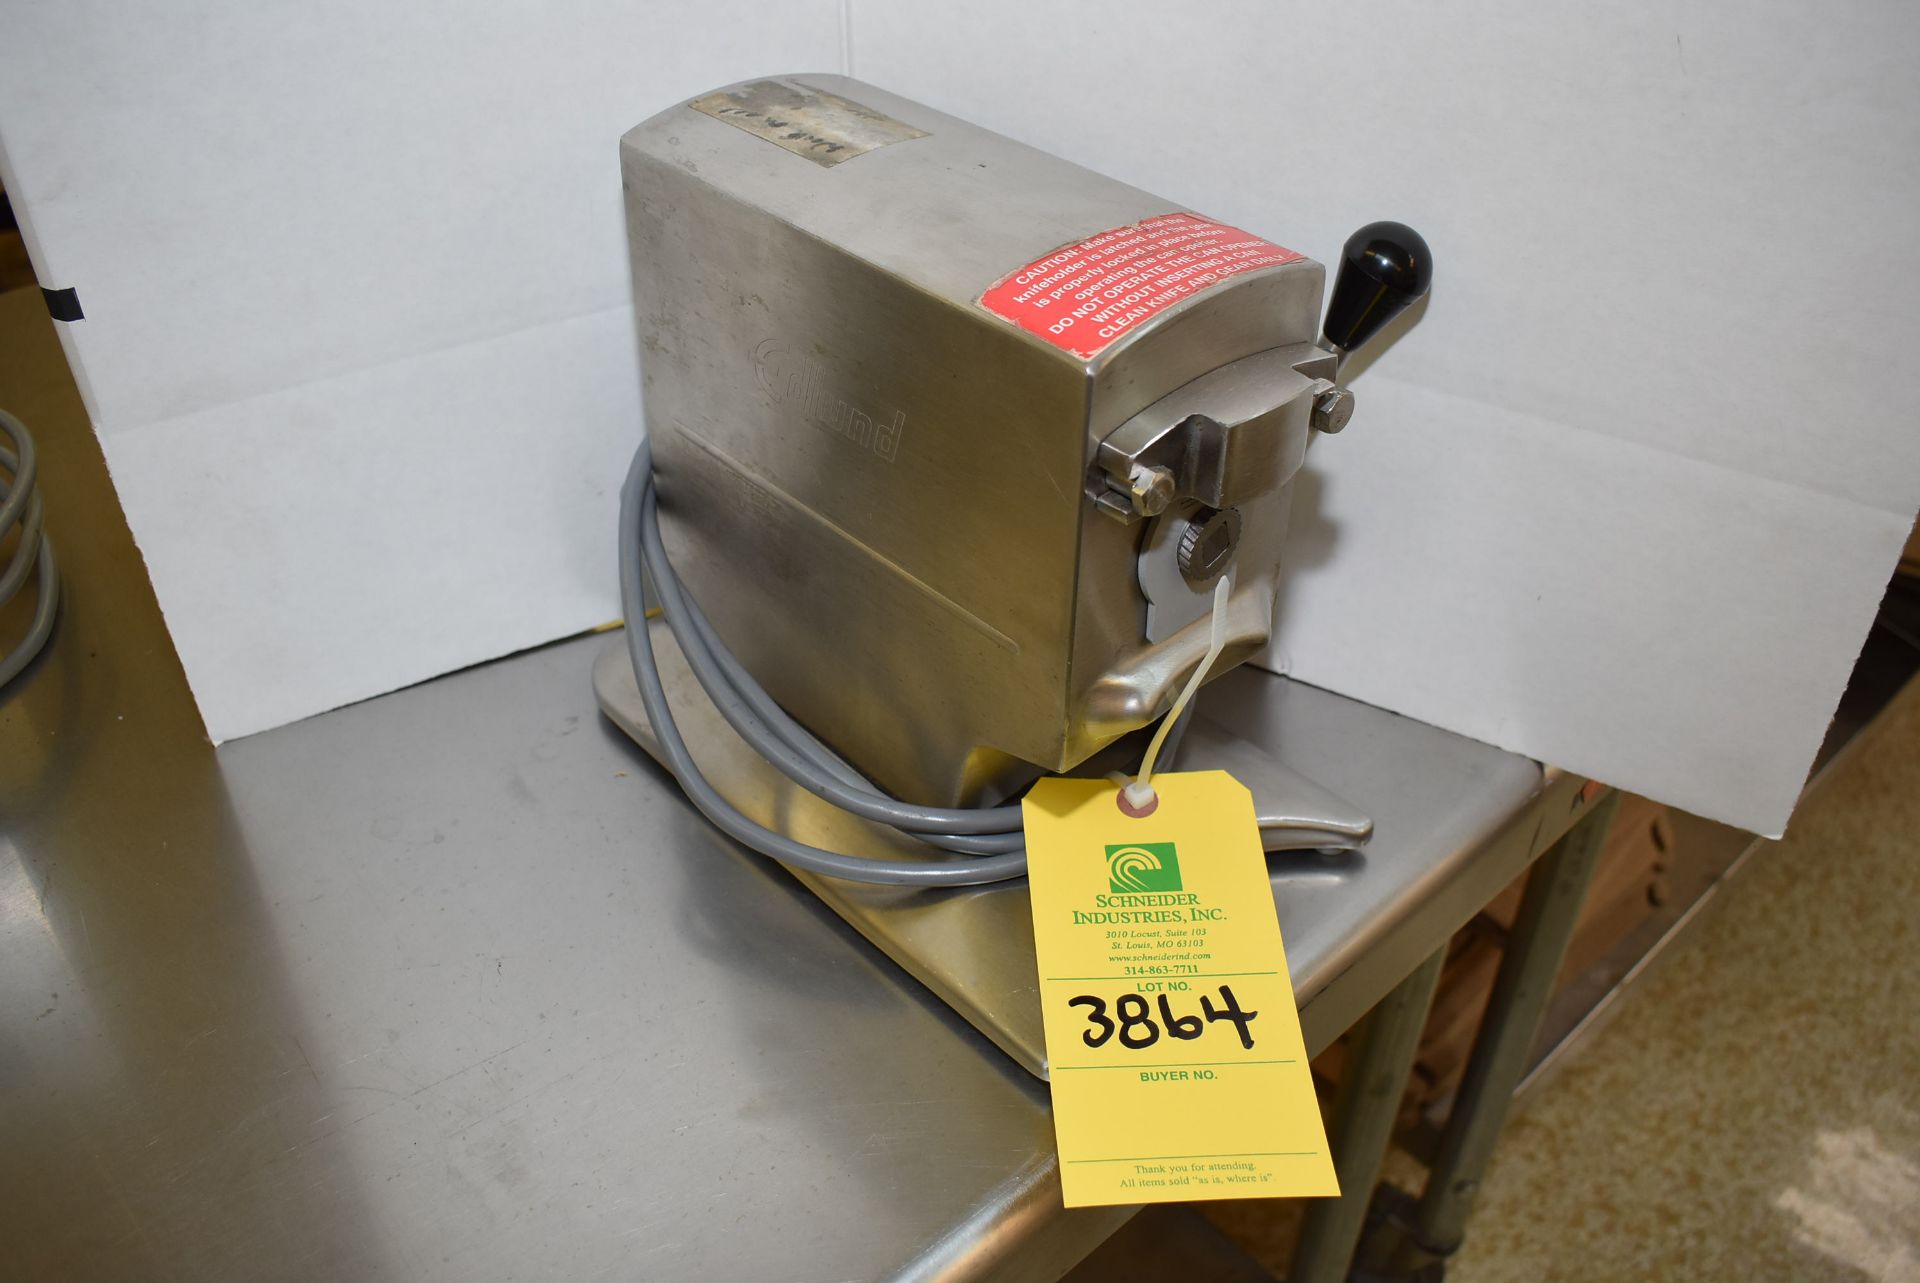 Edlund Model #270 Electric Can Opener, RIGGING FEE: $15